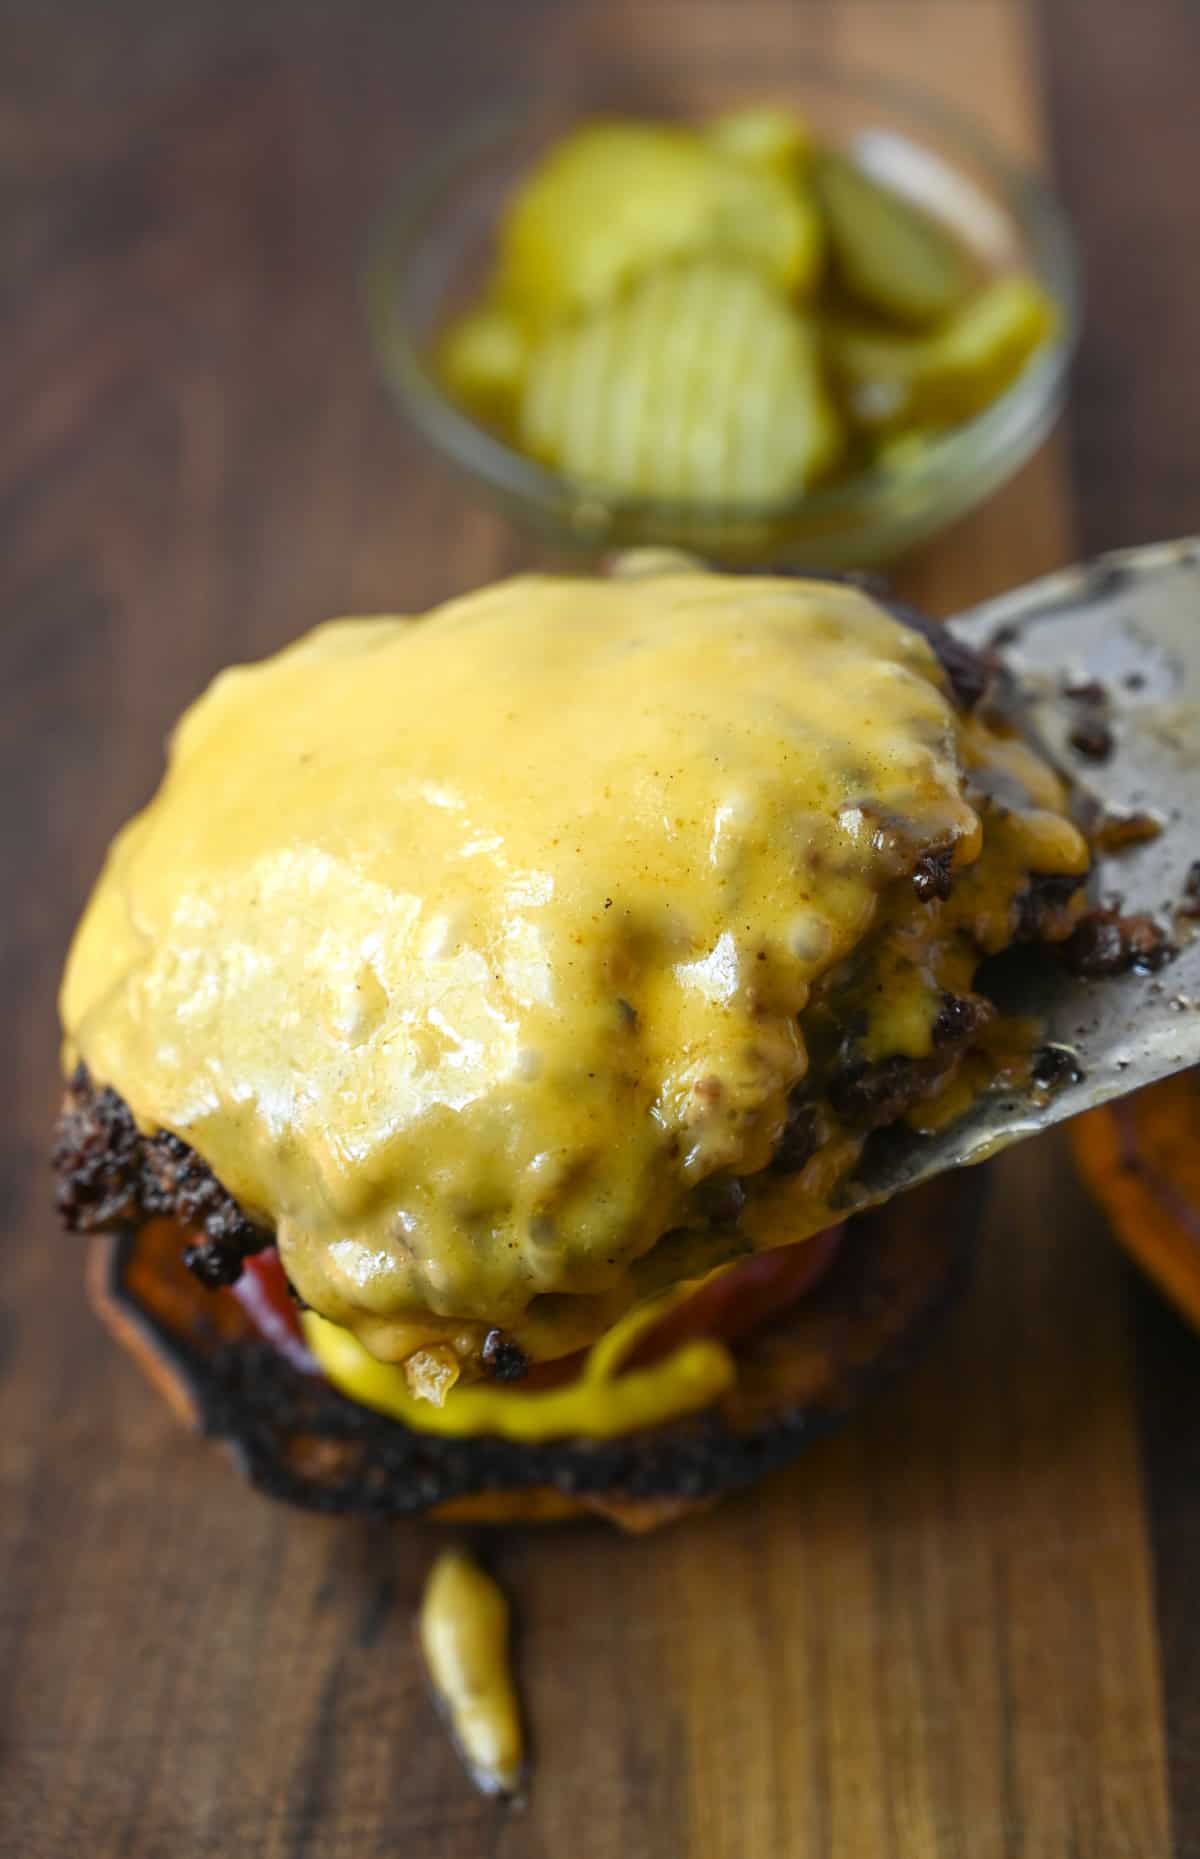 Spatula placing a double layed burger with chees on top of a bun.